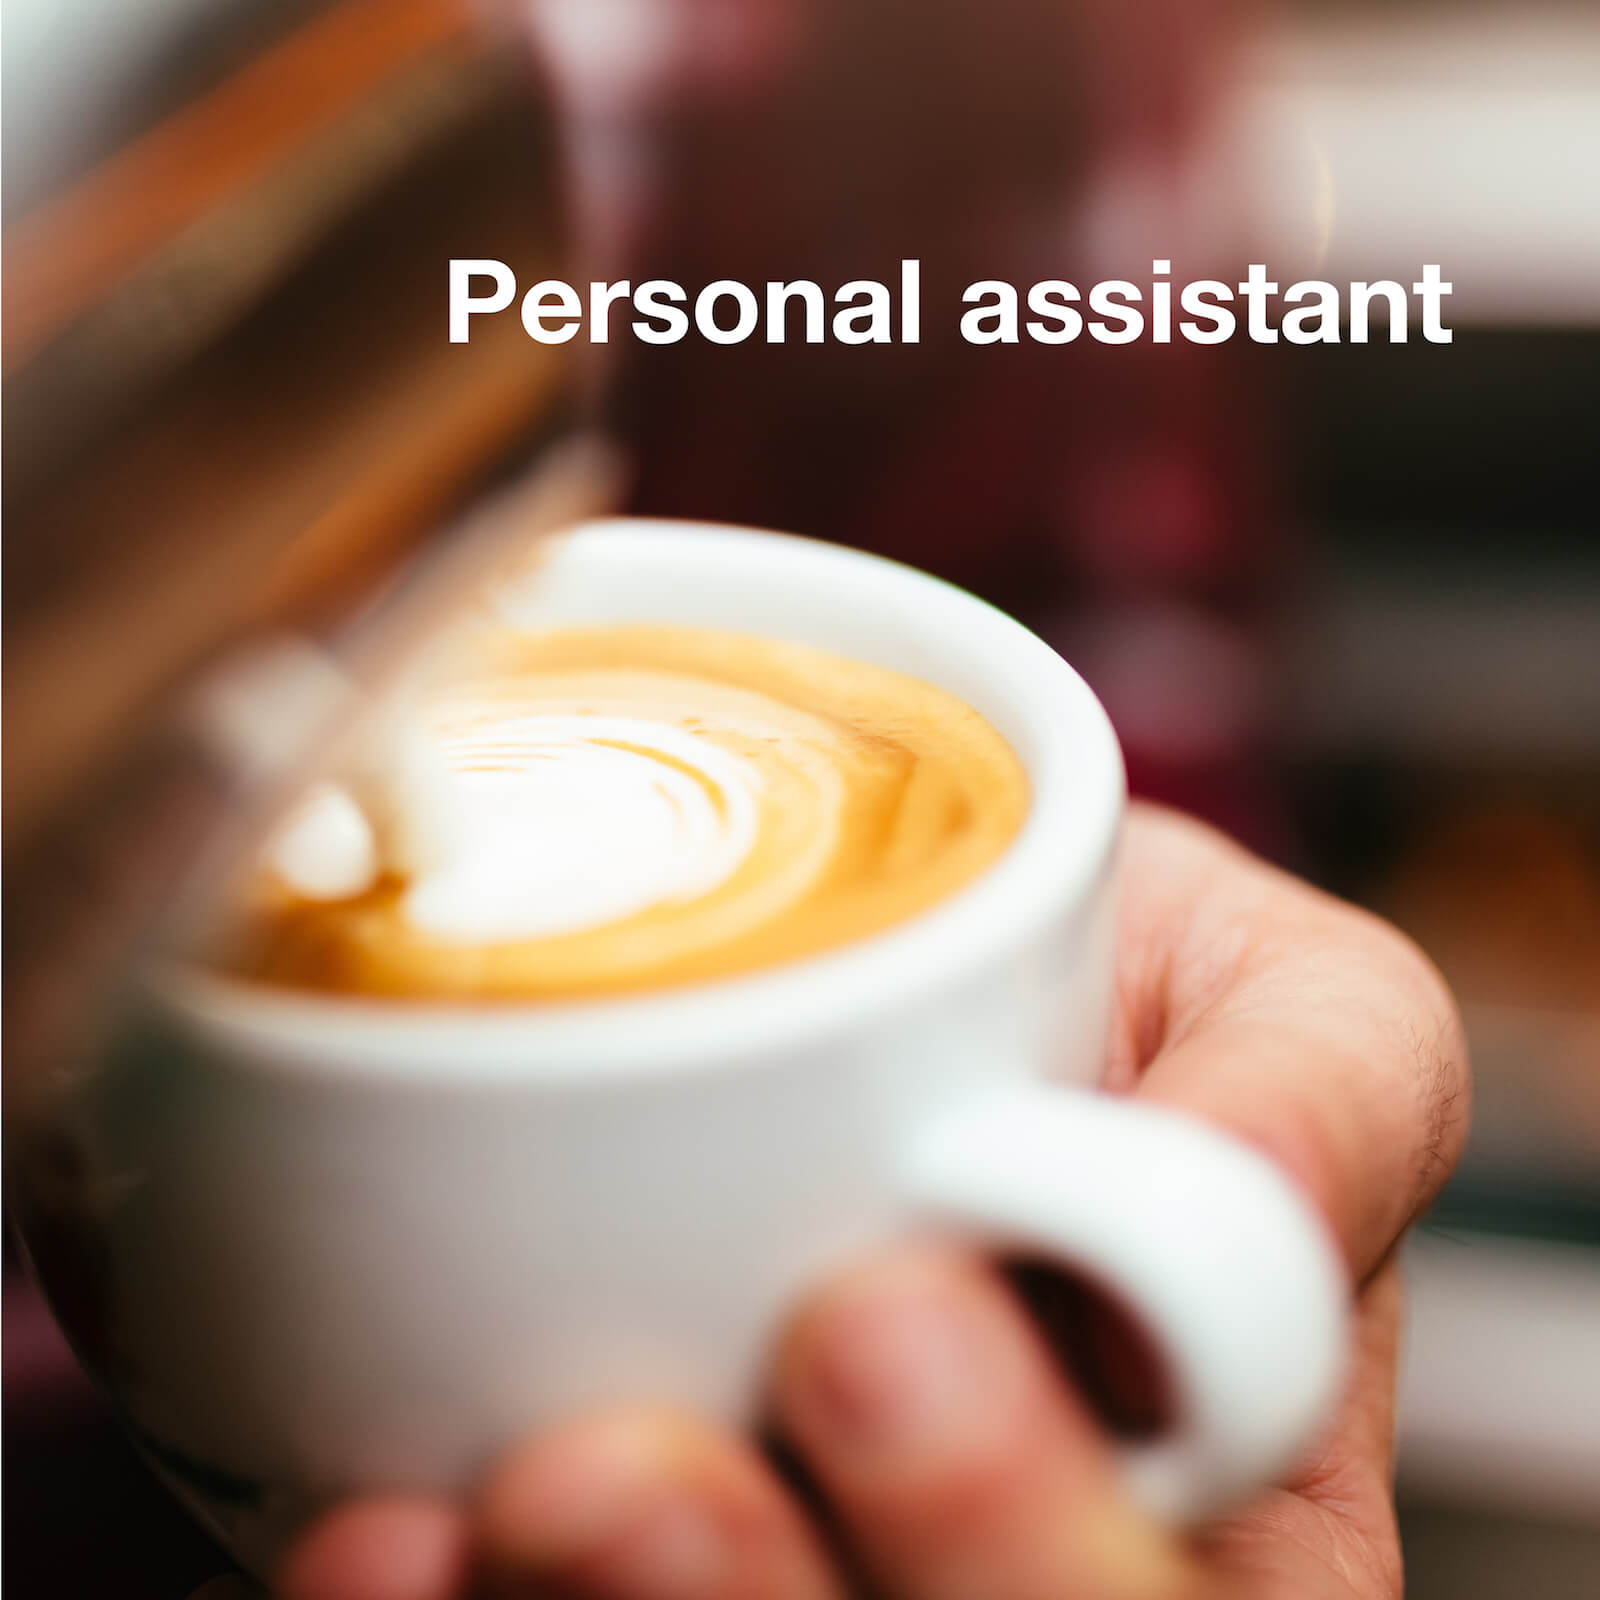 A personal Assistant in a private household can bring family happiness.